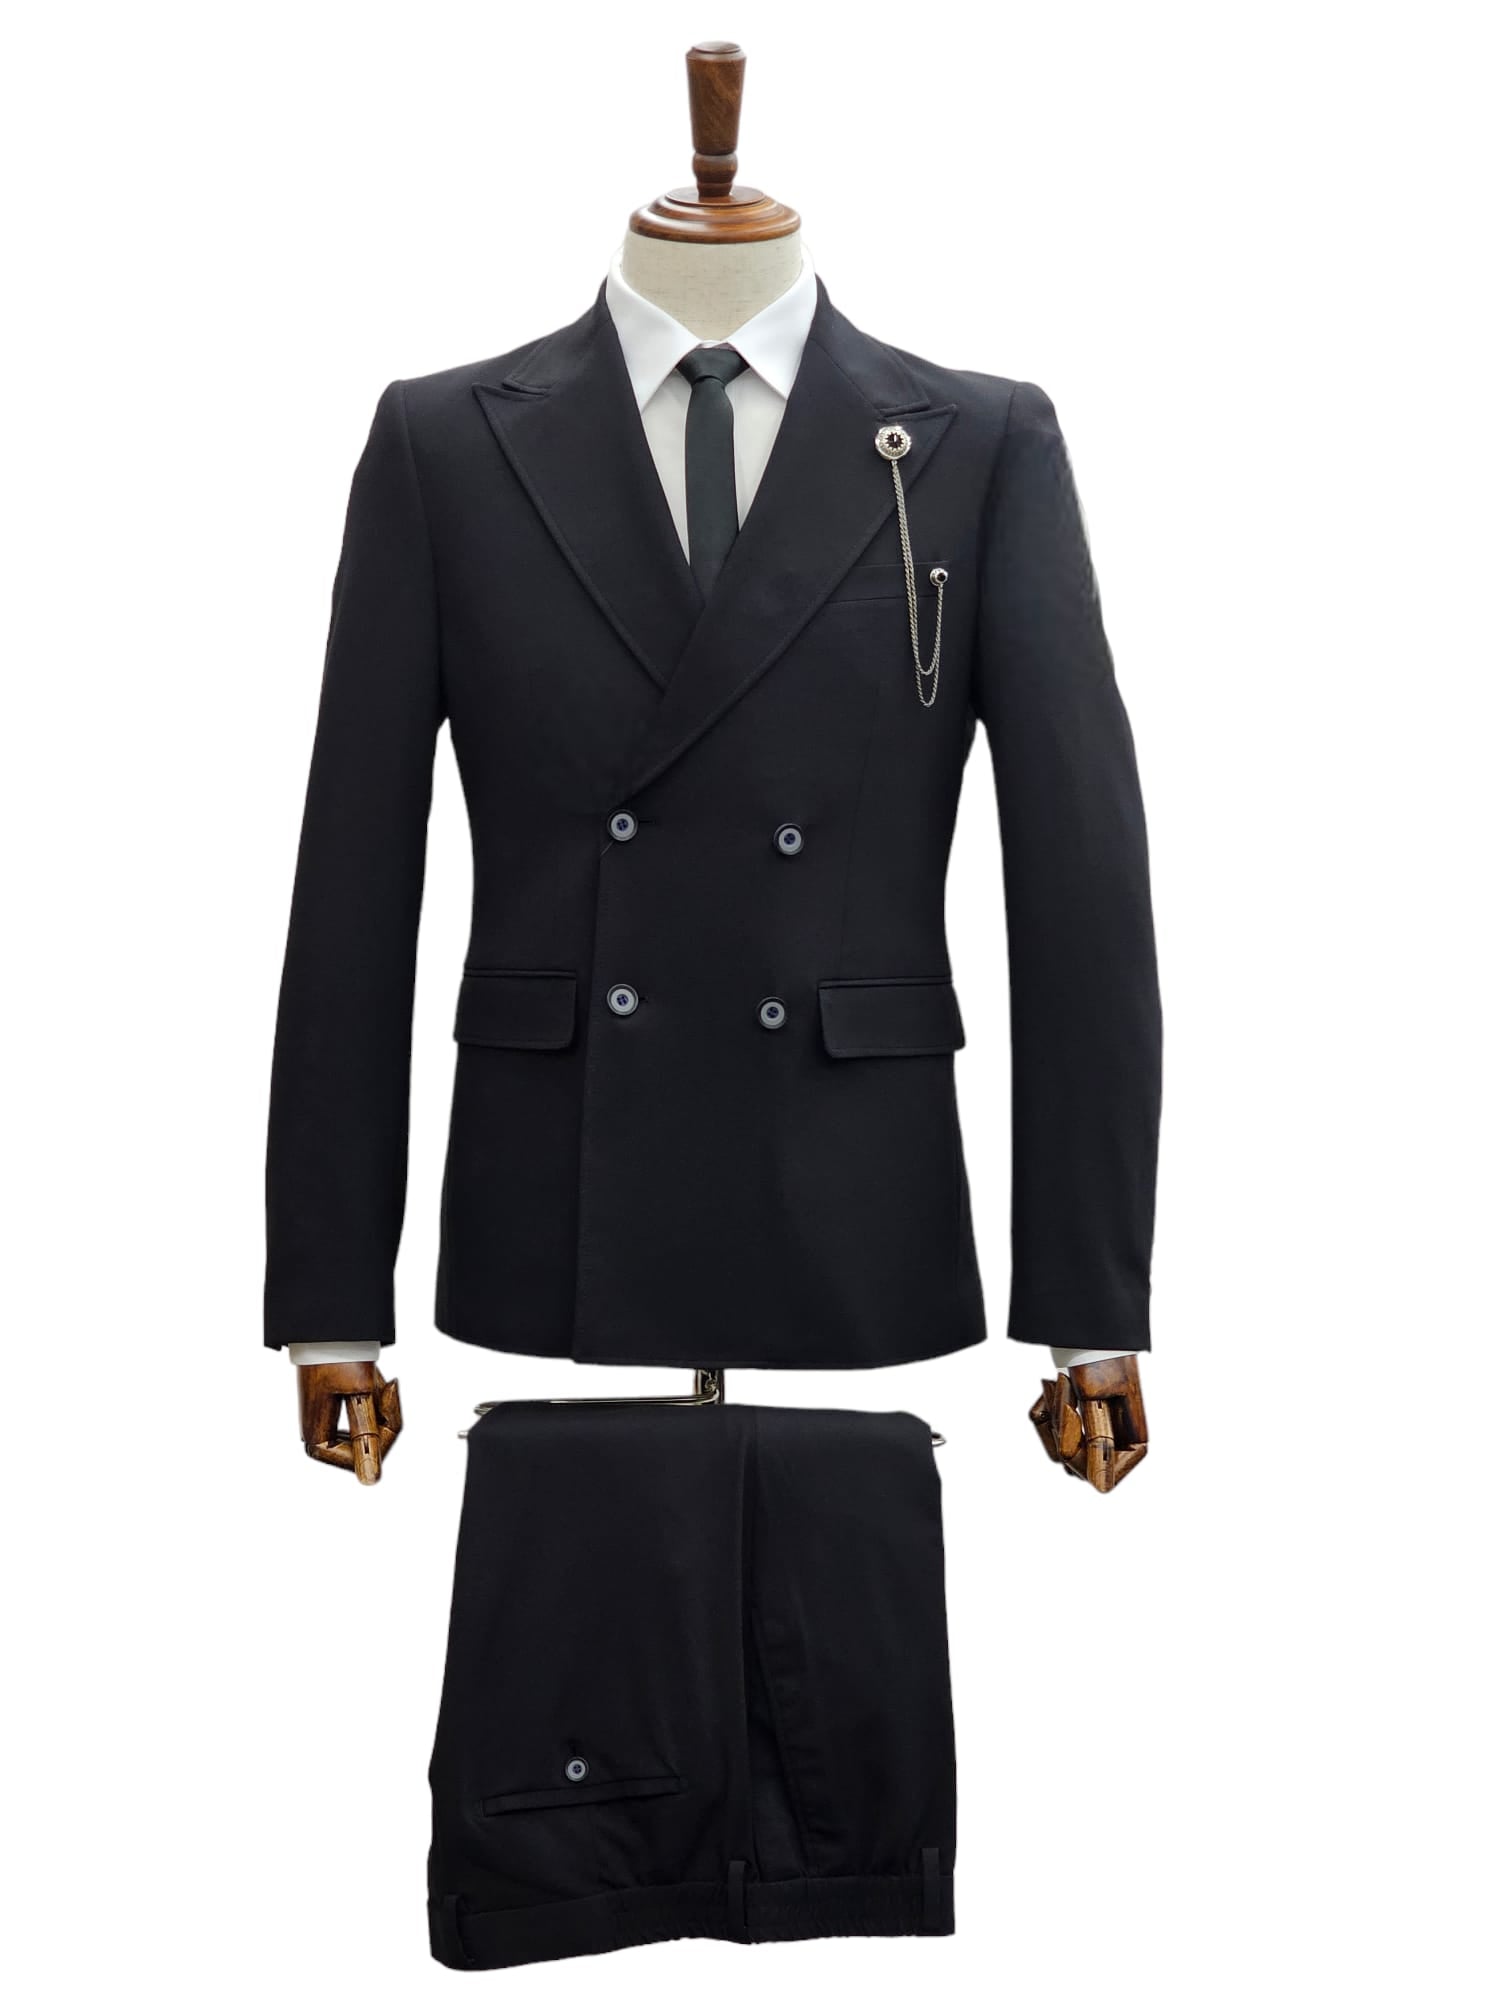 Black Double-Breasted Stretch Suit -Men's Comfortable Formalwear